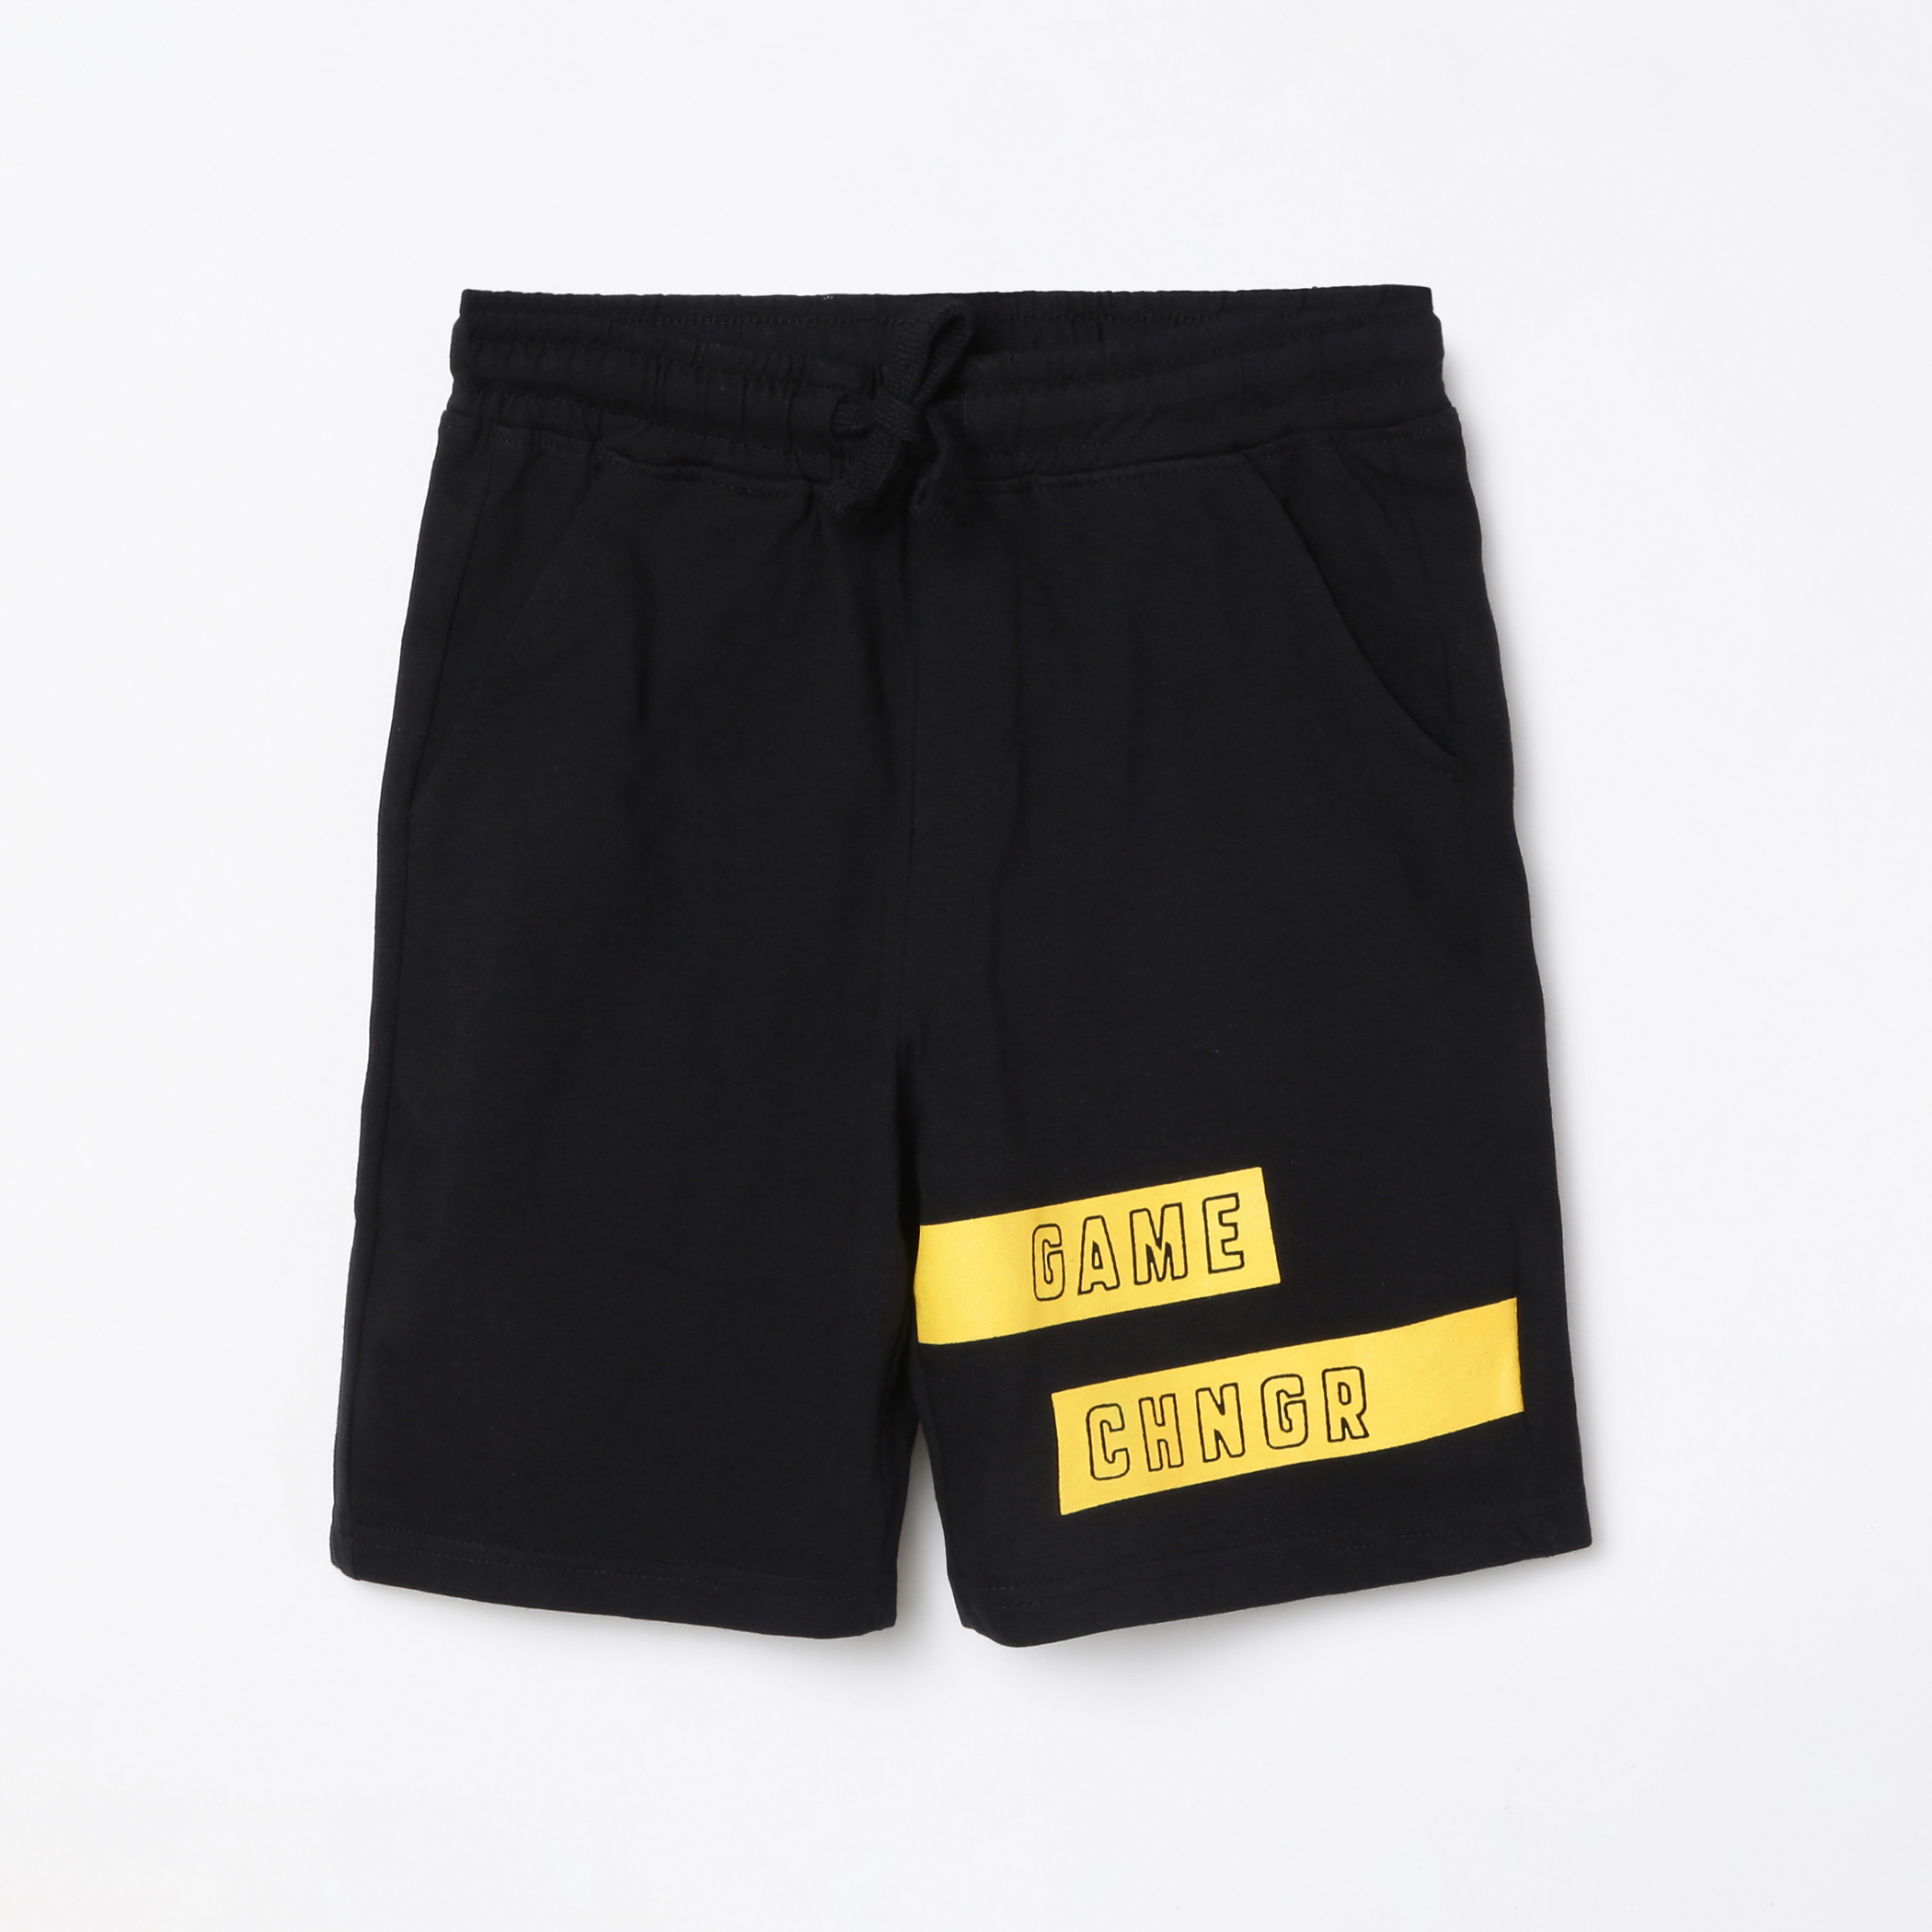 FAME FOREVER YOUNG Boys Printed Elasticated Shorts